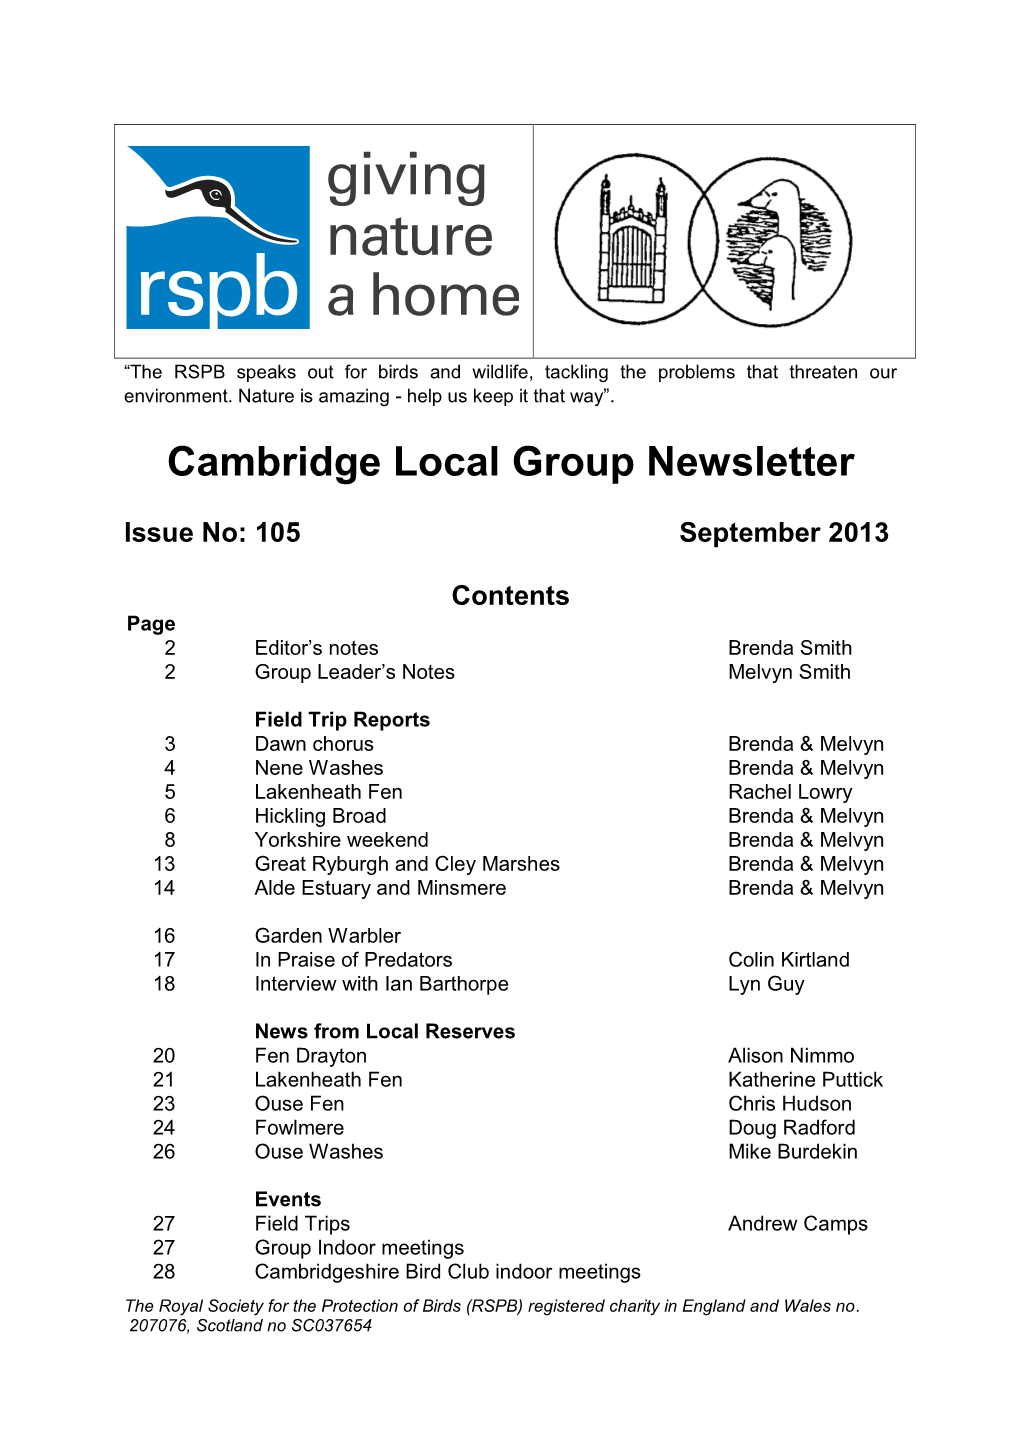 Cambridge Local Group Newsletter